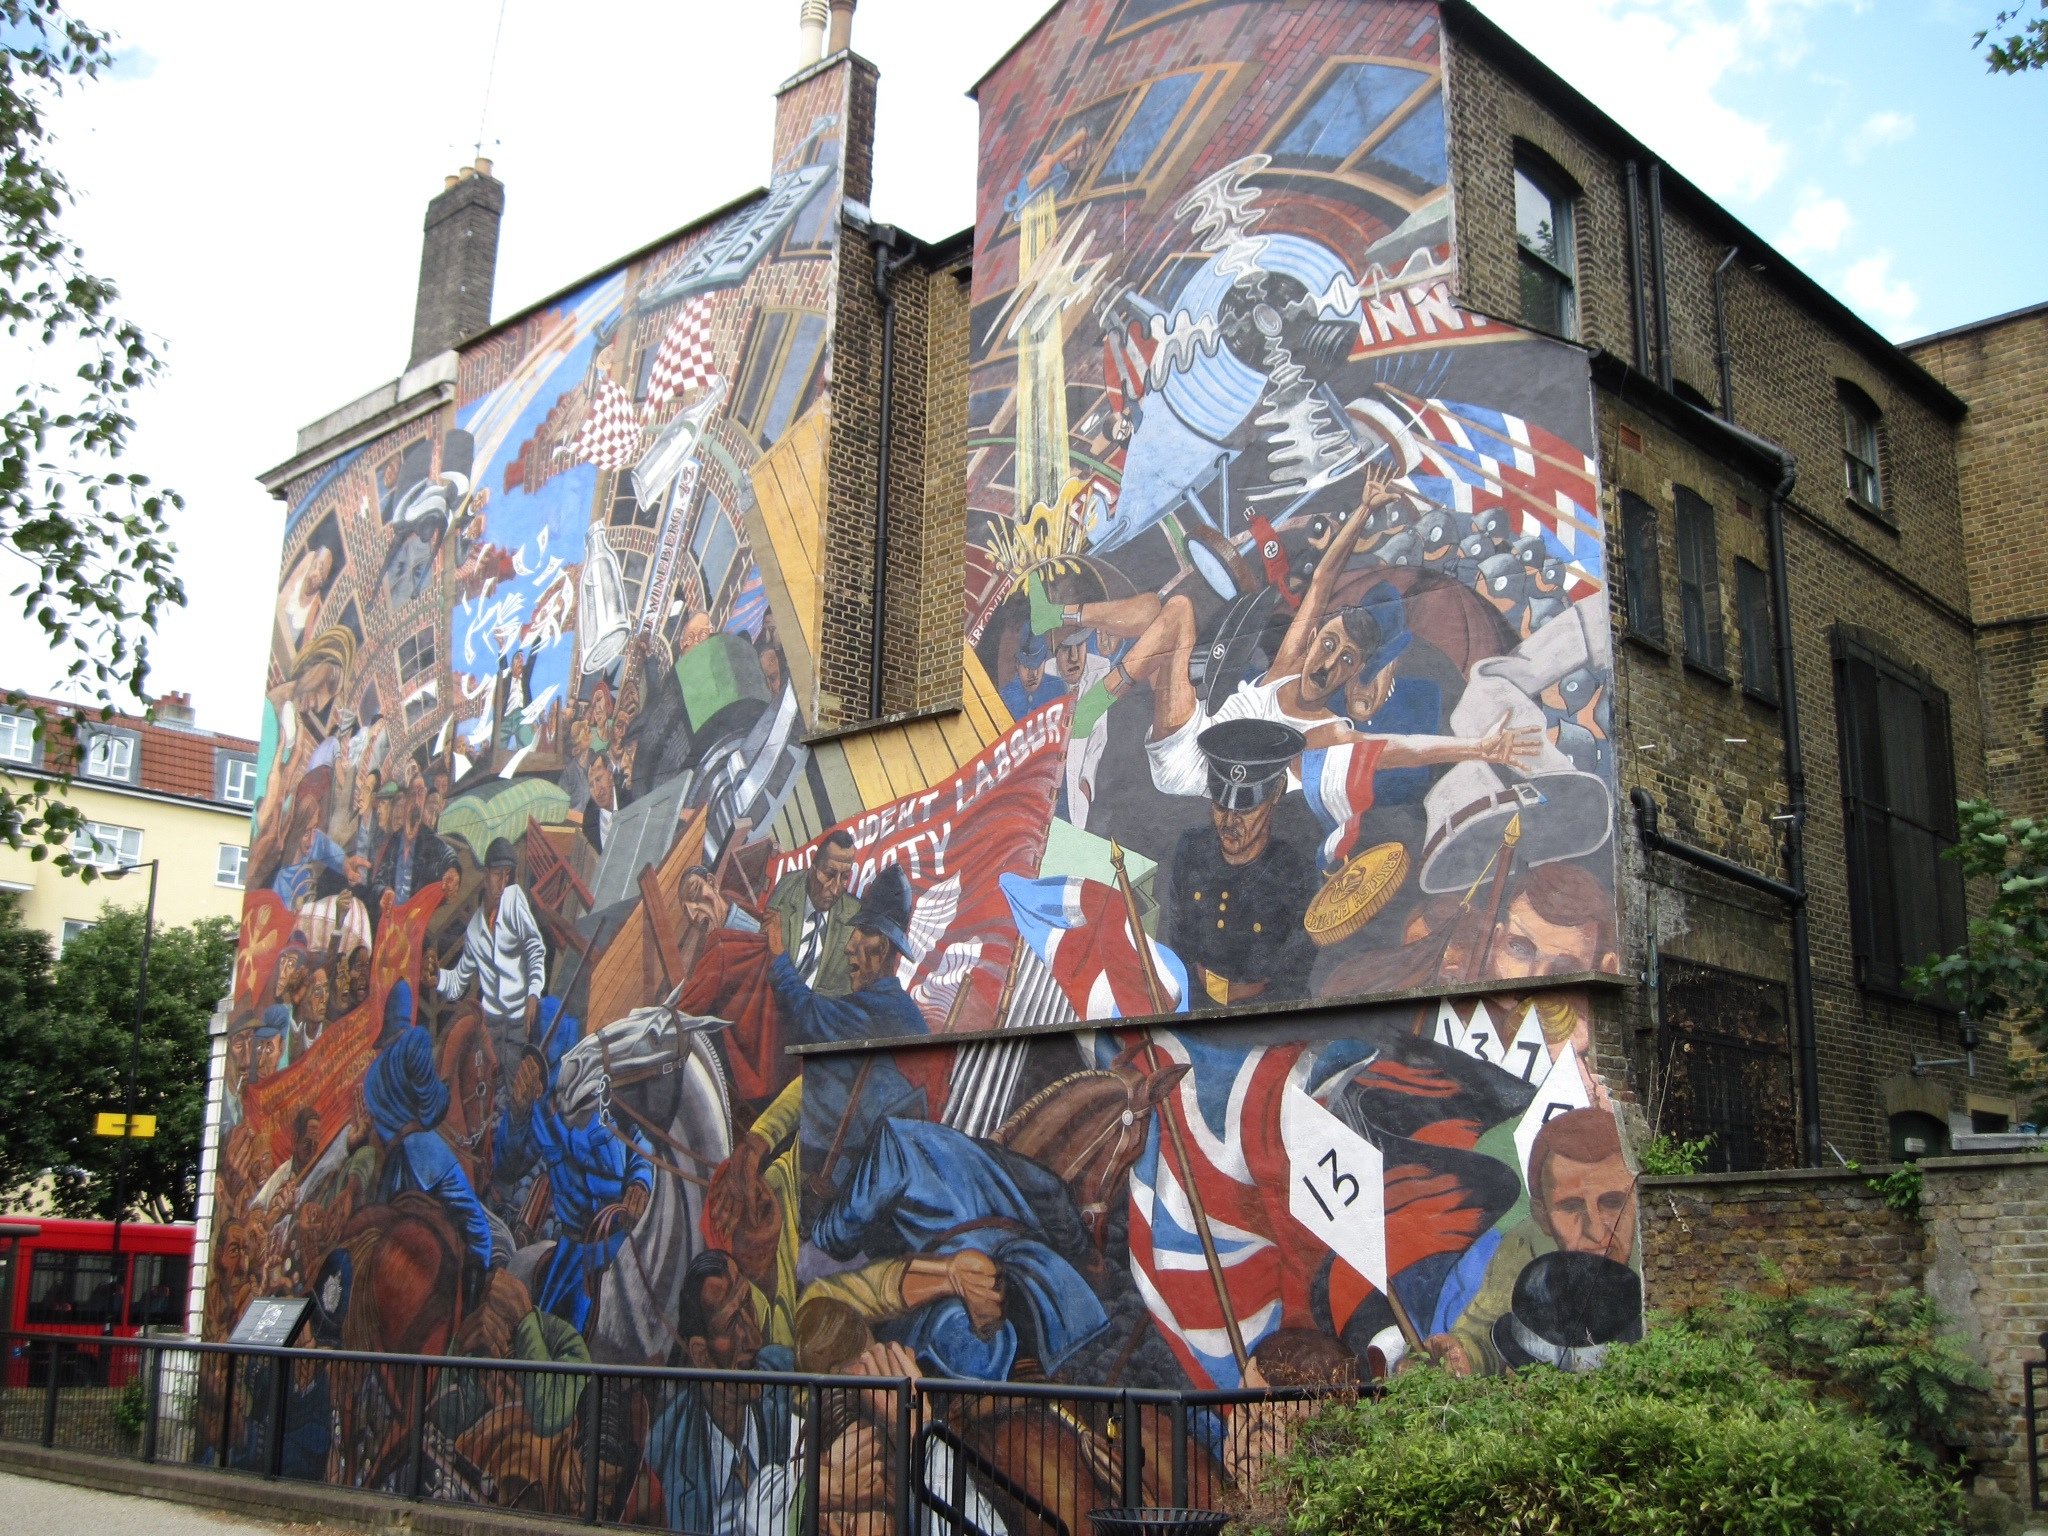 Mural on the side of a building commemorating the Battle of Cable Street